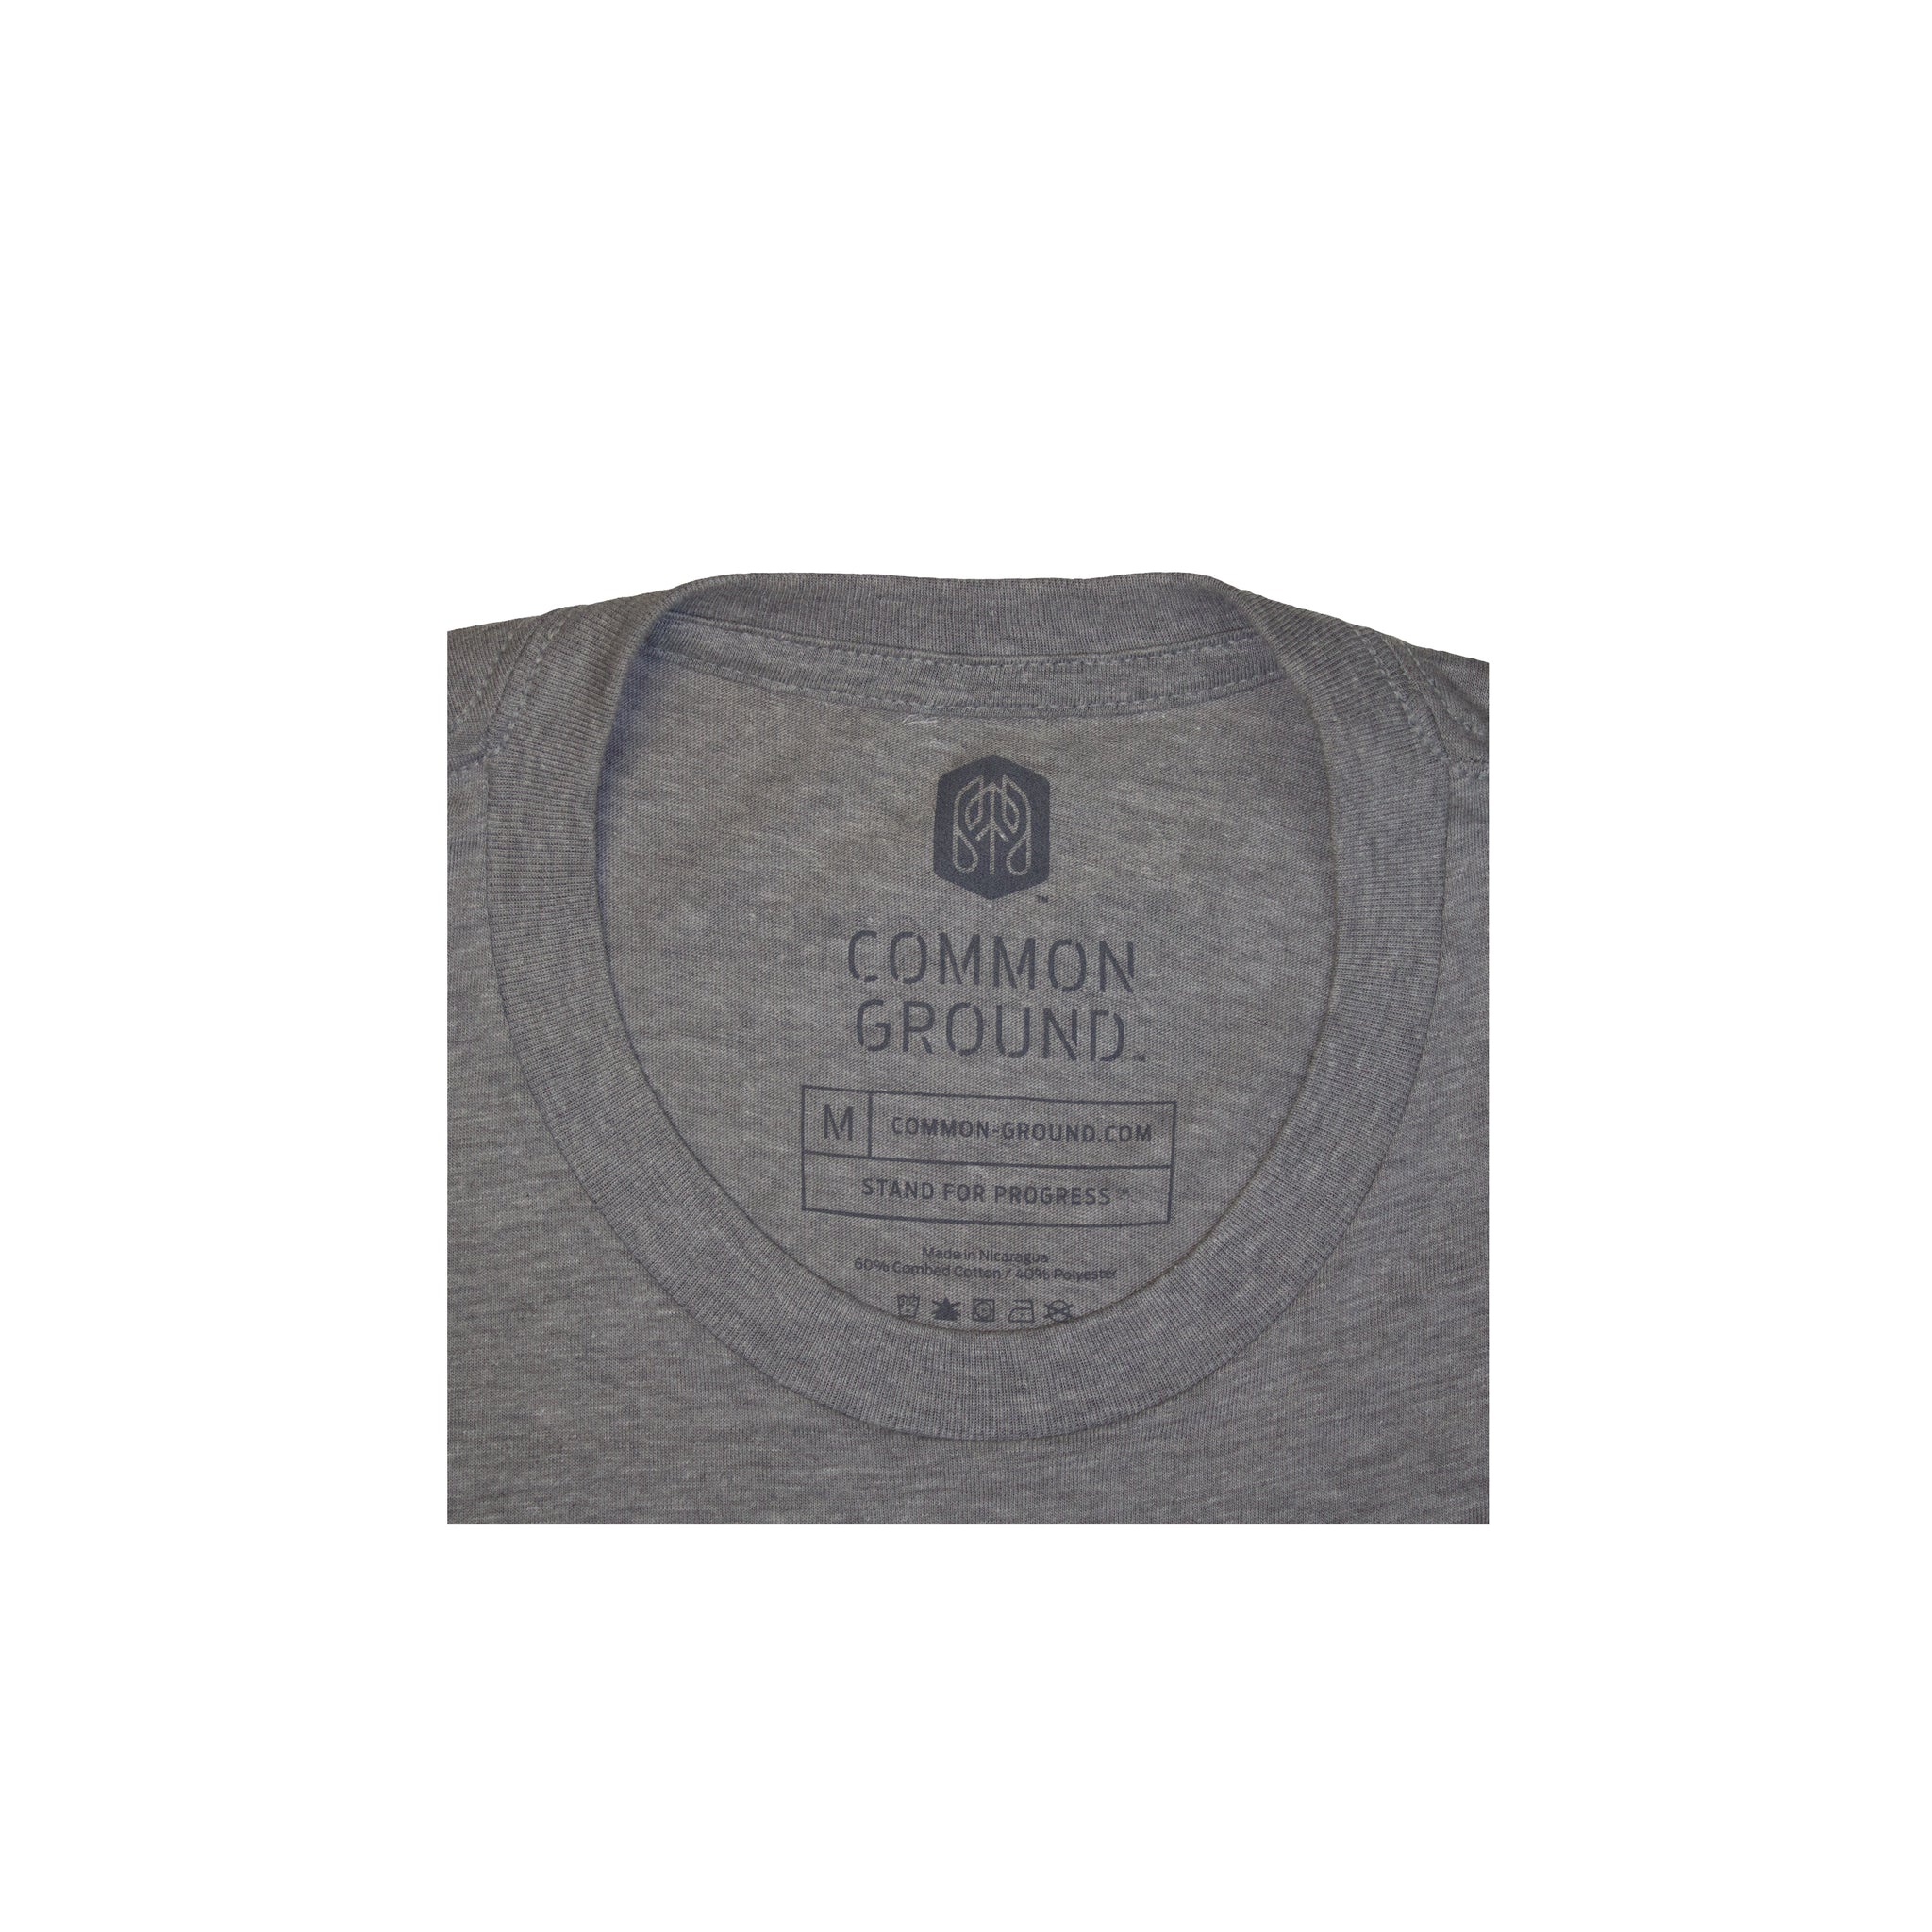 Dark_Heather_Gray - Stand For Progress T shirt Neck Tag View